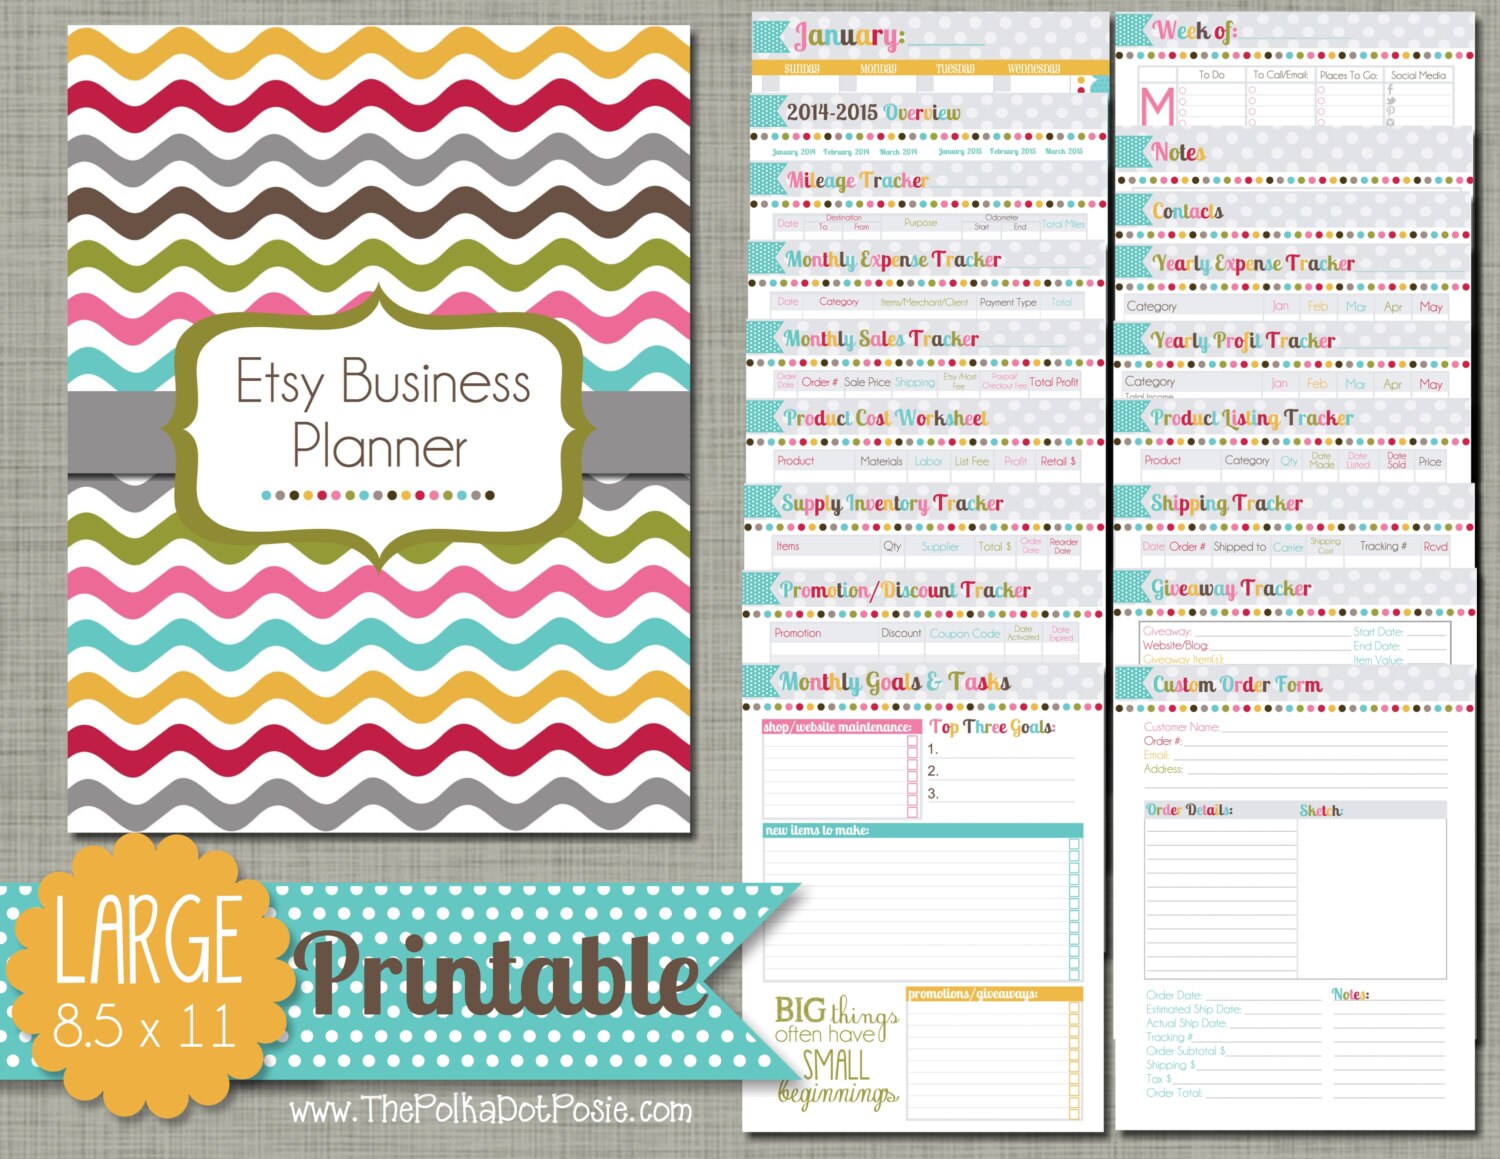 Etsy Business Planner Printable Set Sized Large 8.5